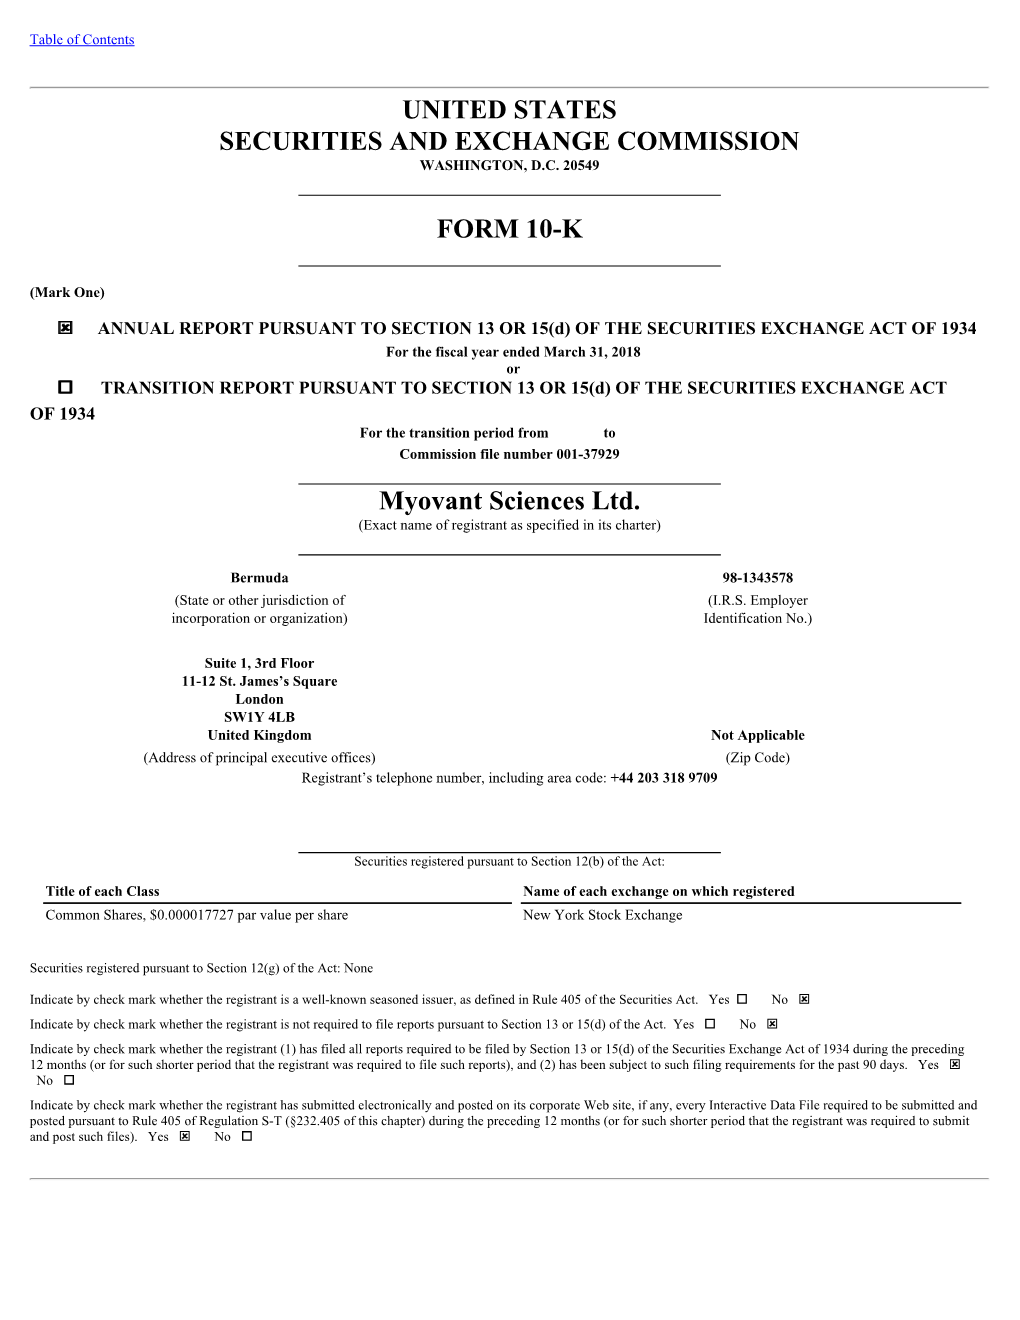 UNITED STATES SECURITIES and EXCHANGE COMMISSION FORM 10-K Myovant Sciences Ltd